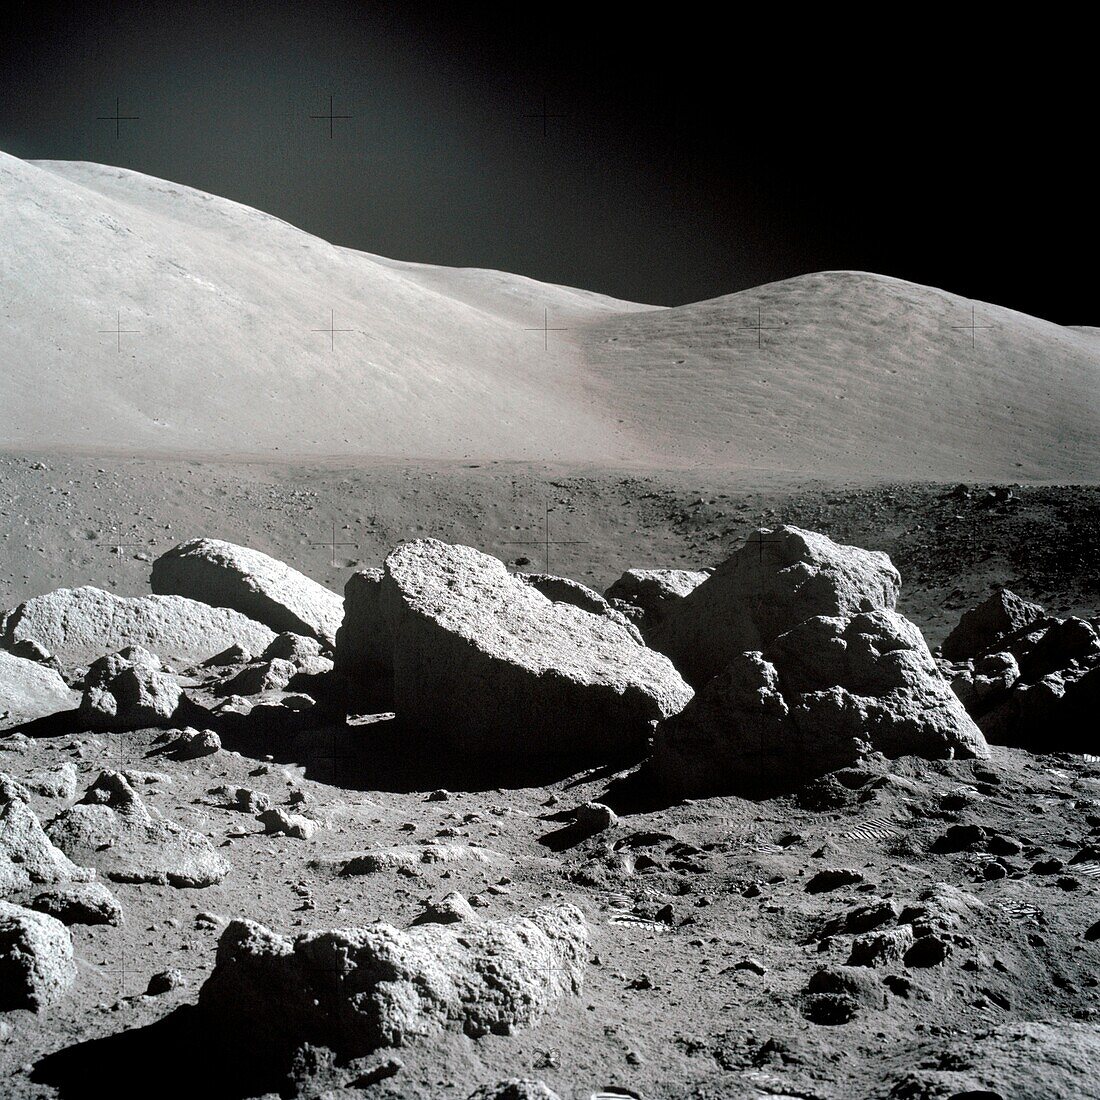 Camelot Crater on the Moon, Apollo 17 image